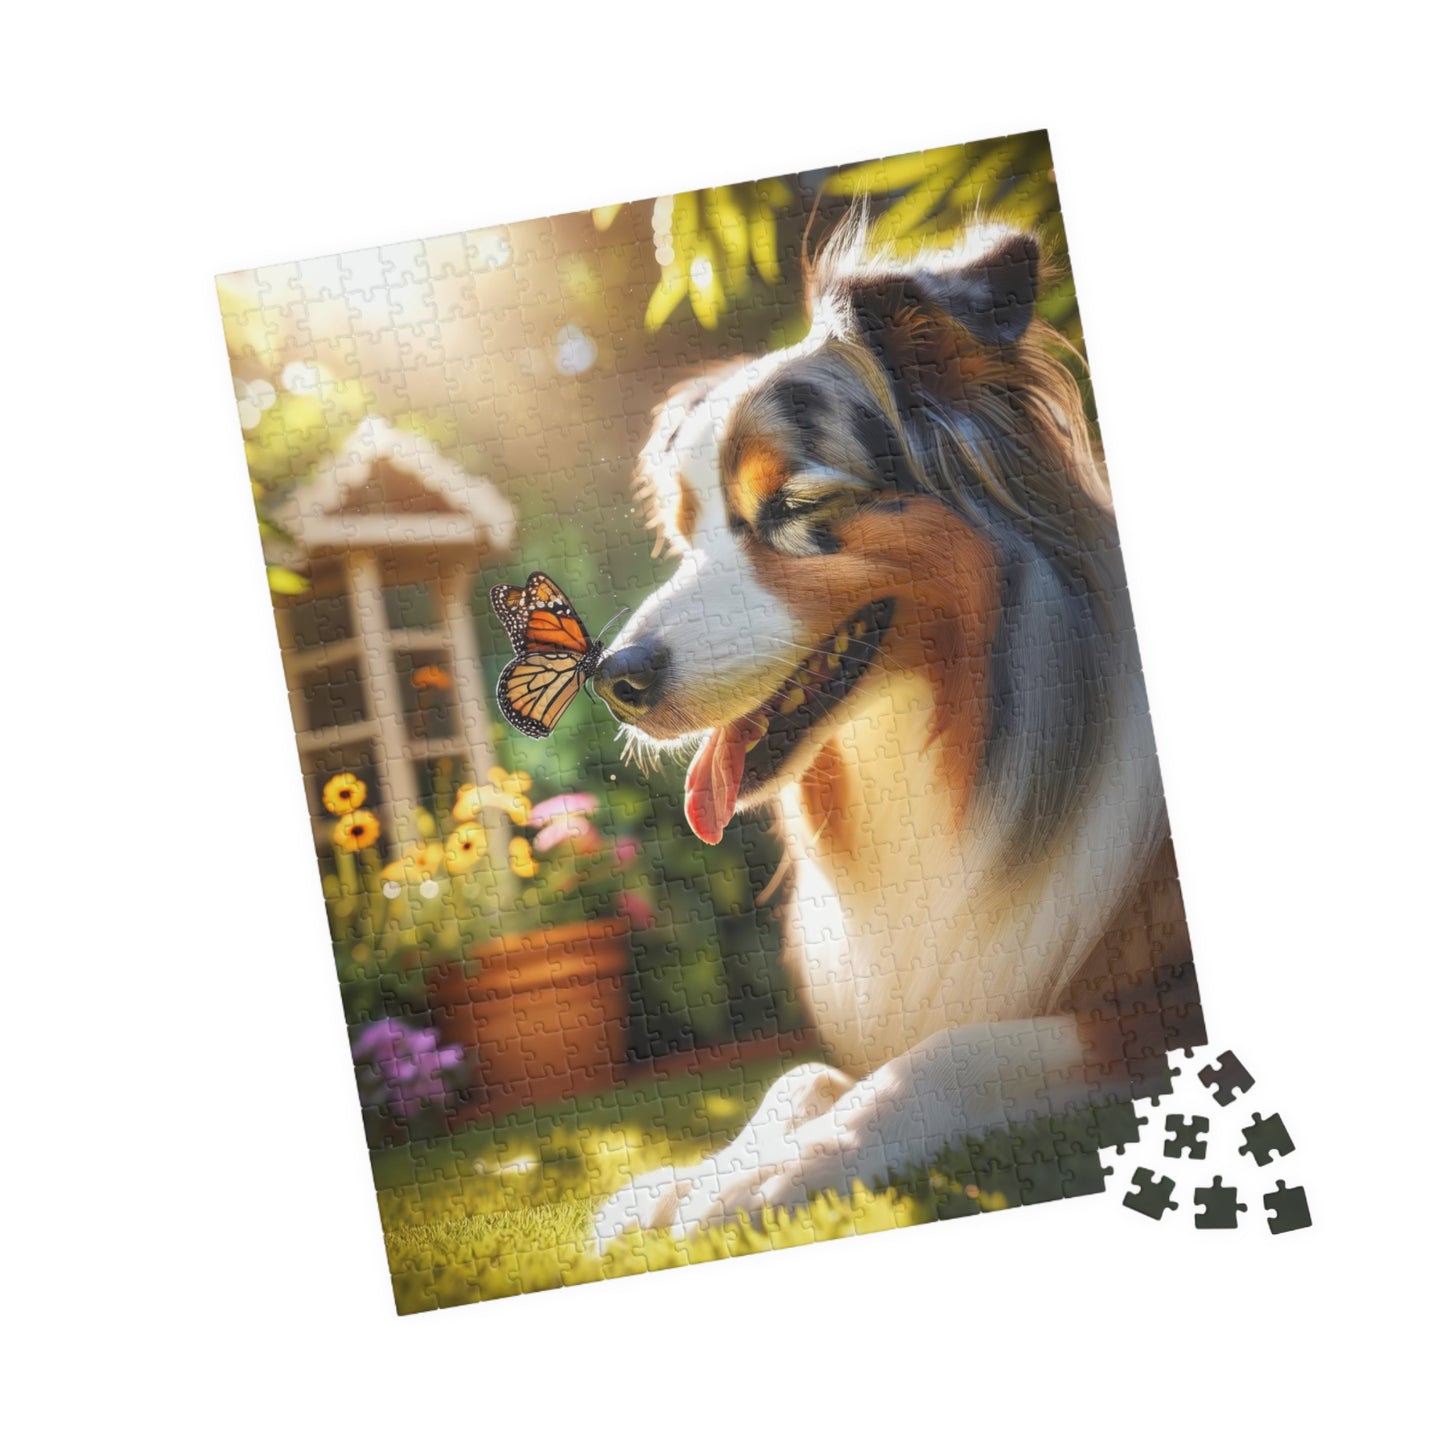 Australian Shepherd & Butterfly Puzzle - Sunlit Serenity - Mindful Family Activity - 110 to 1014 Pieces